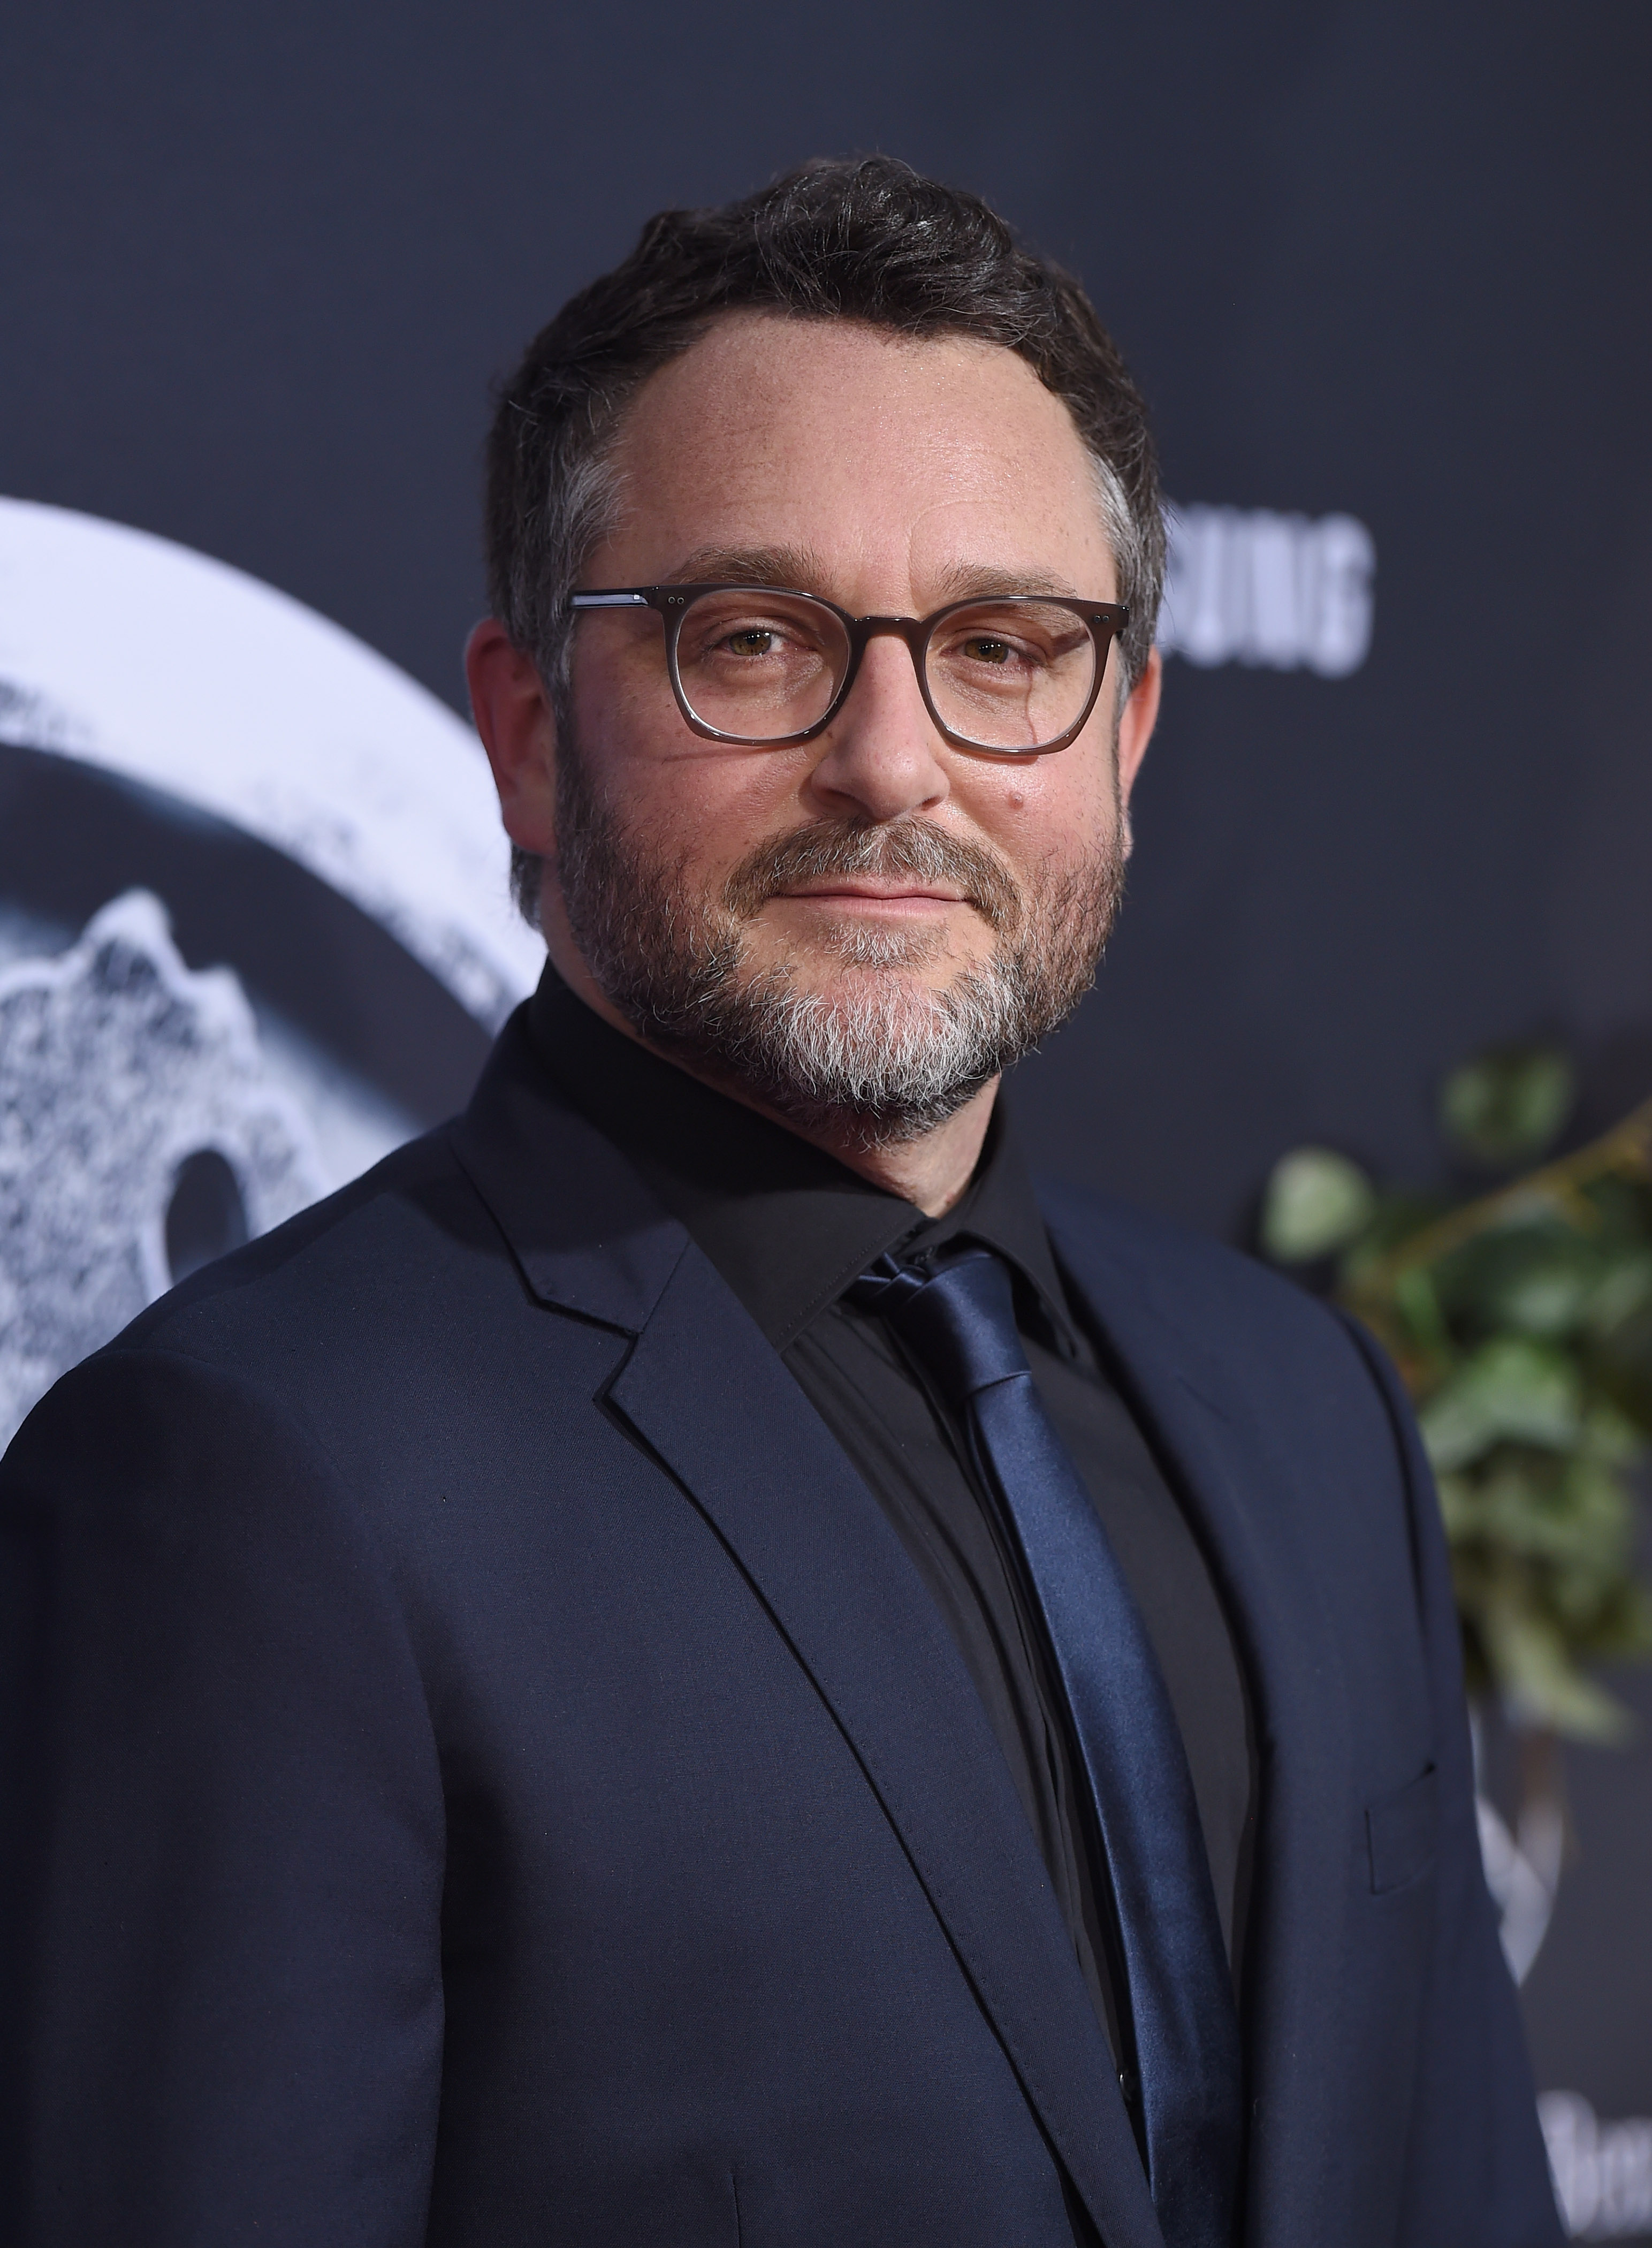 Colin Trevorrow arrives at the World Premiere of 'Jurassic World' on June 9, 2015 in Hollywood, Calif. (Axelle/Bauer-Griffin—Getty Images)